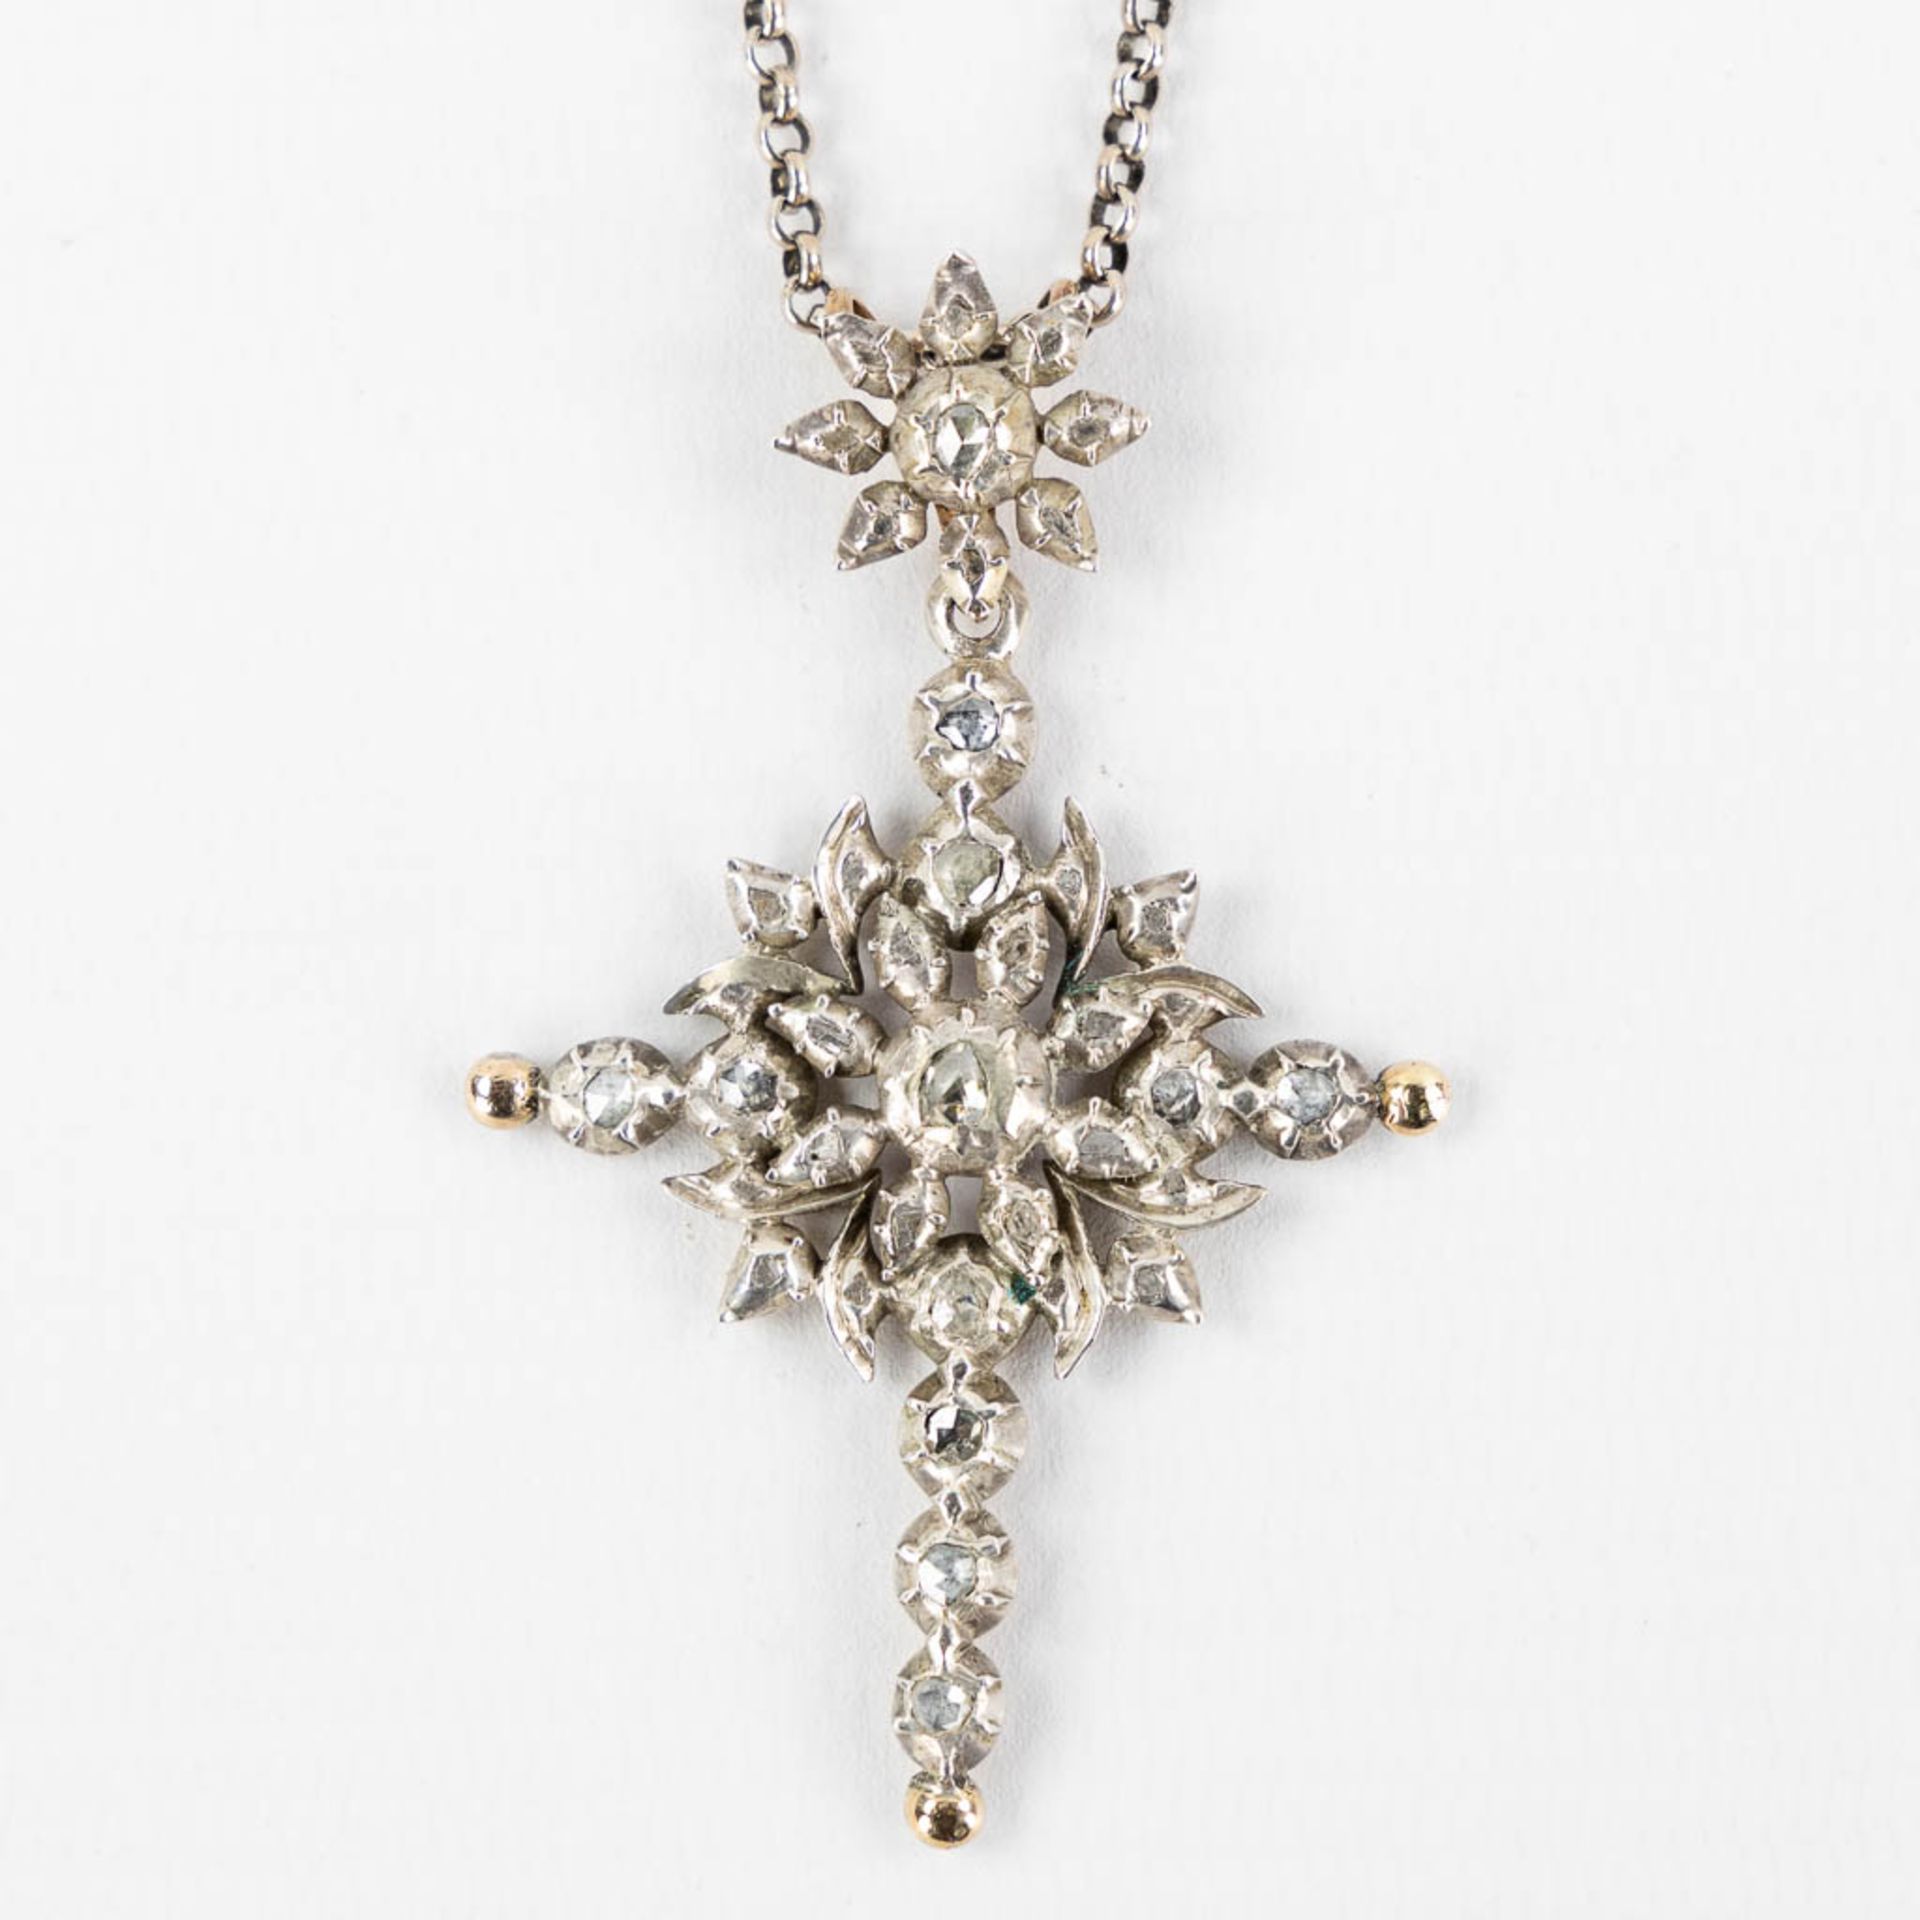 Three antique pendants in the shape of a crucifix, with old-cut diamonds. 18kt white and yelow gold. - Image 4 of 9